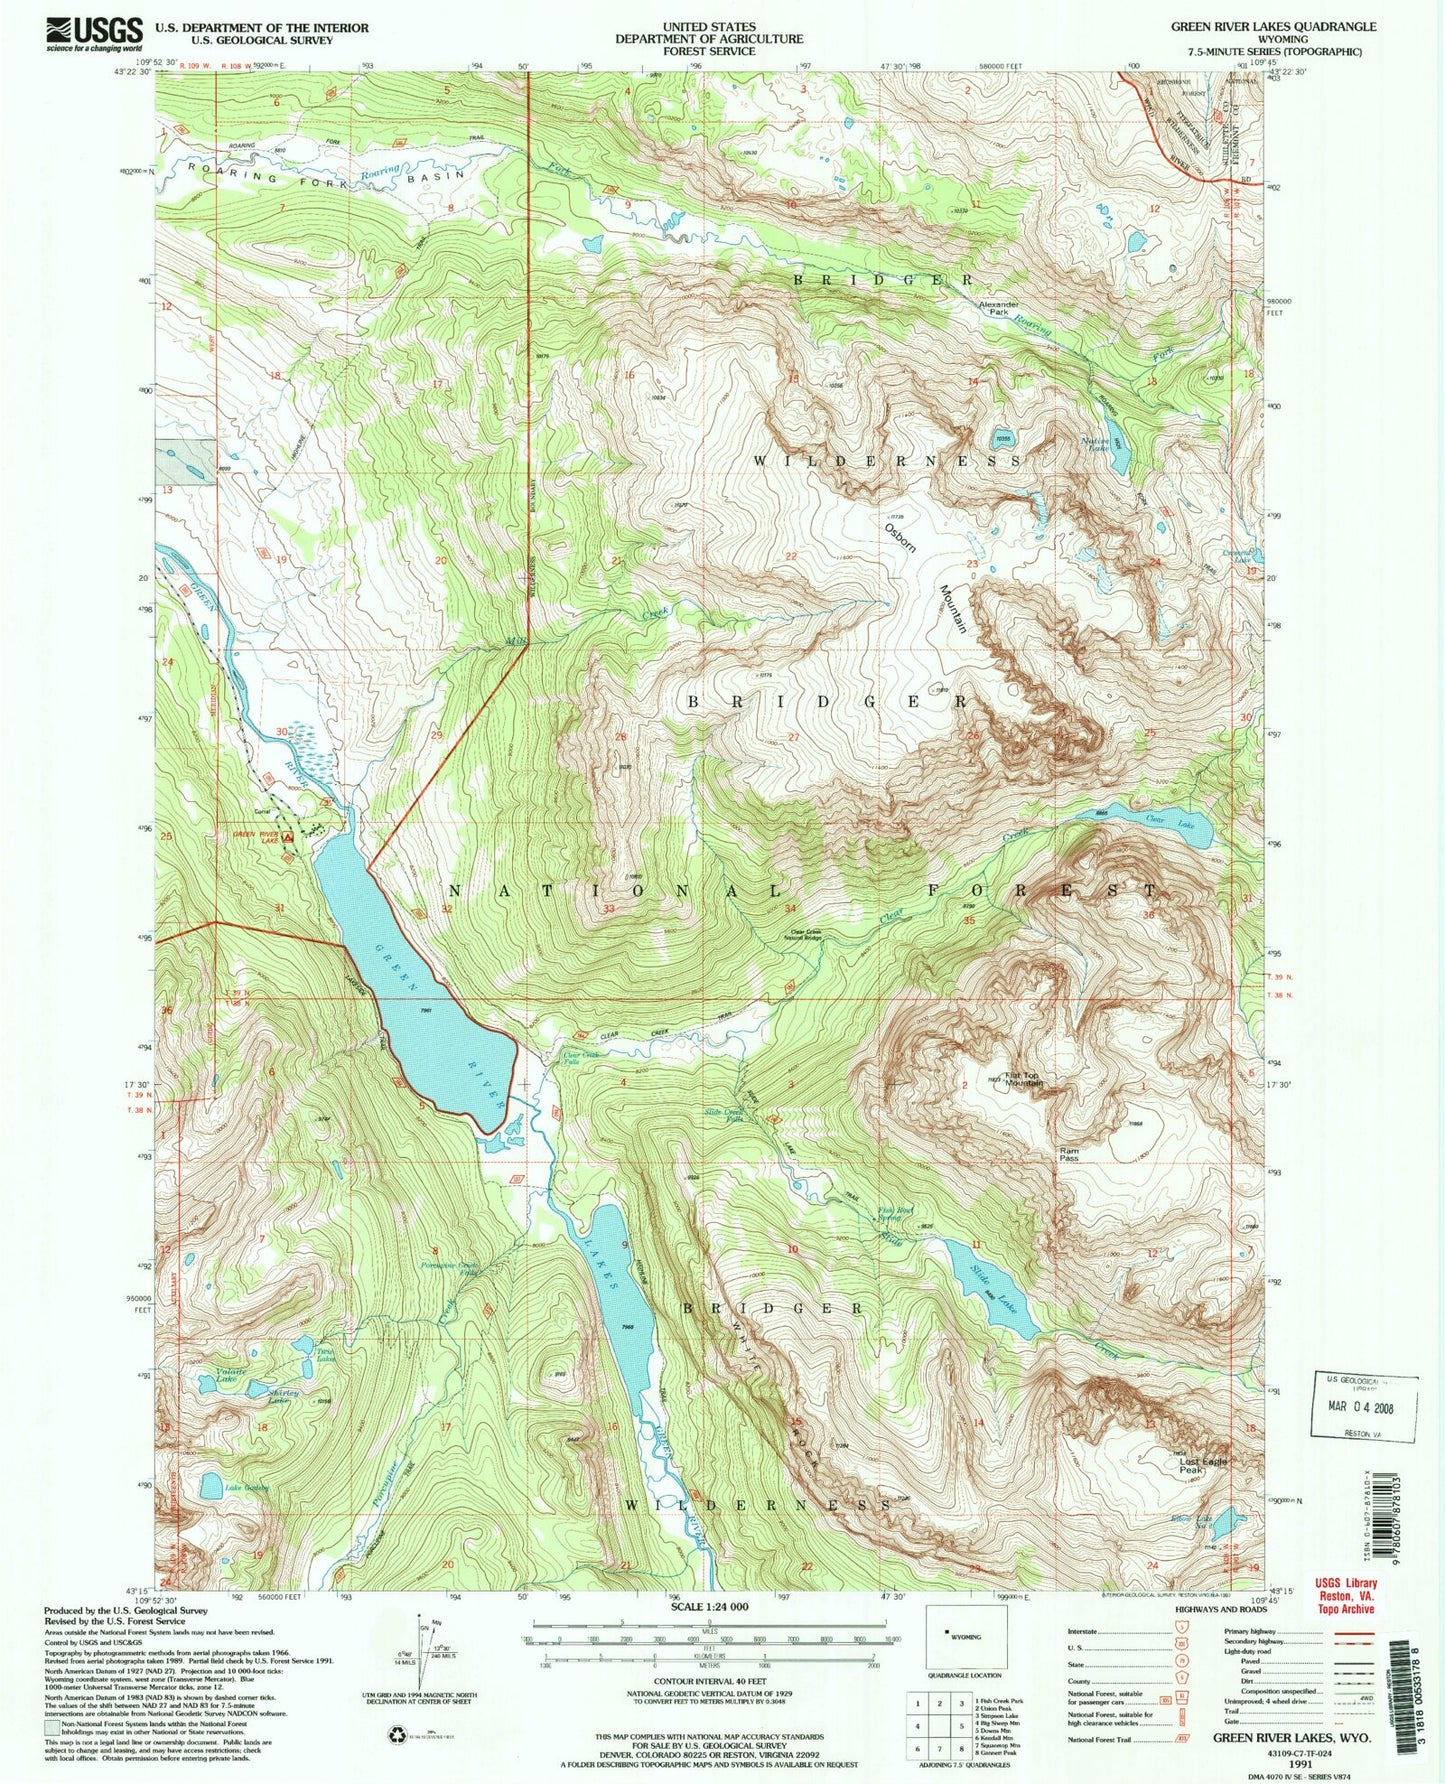 USGS Classic Green River Lakes Wyoming 7.5'x7.5' Topo Map Image